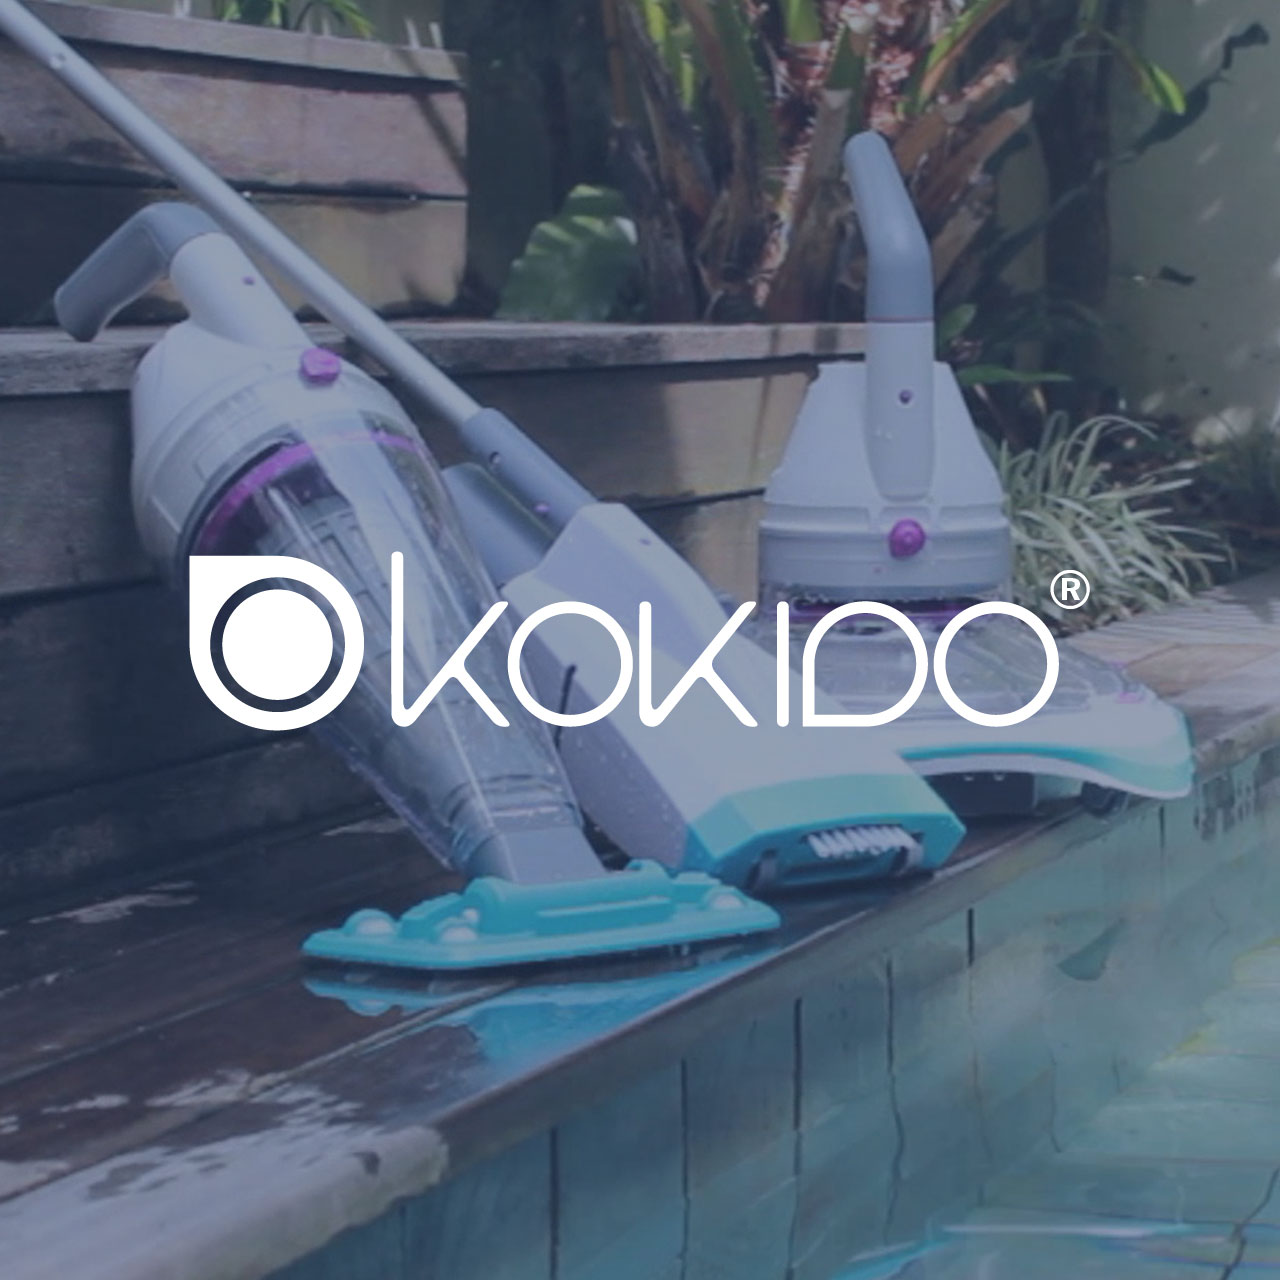 Kokido: maintenance and care of swimming pools and spas